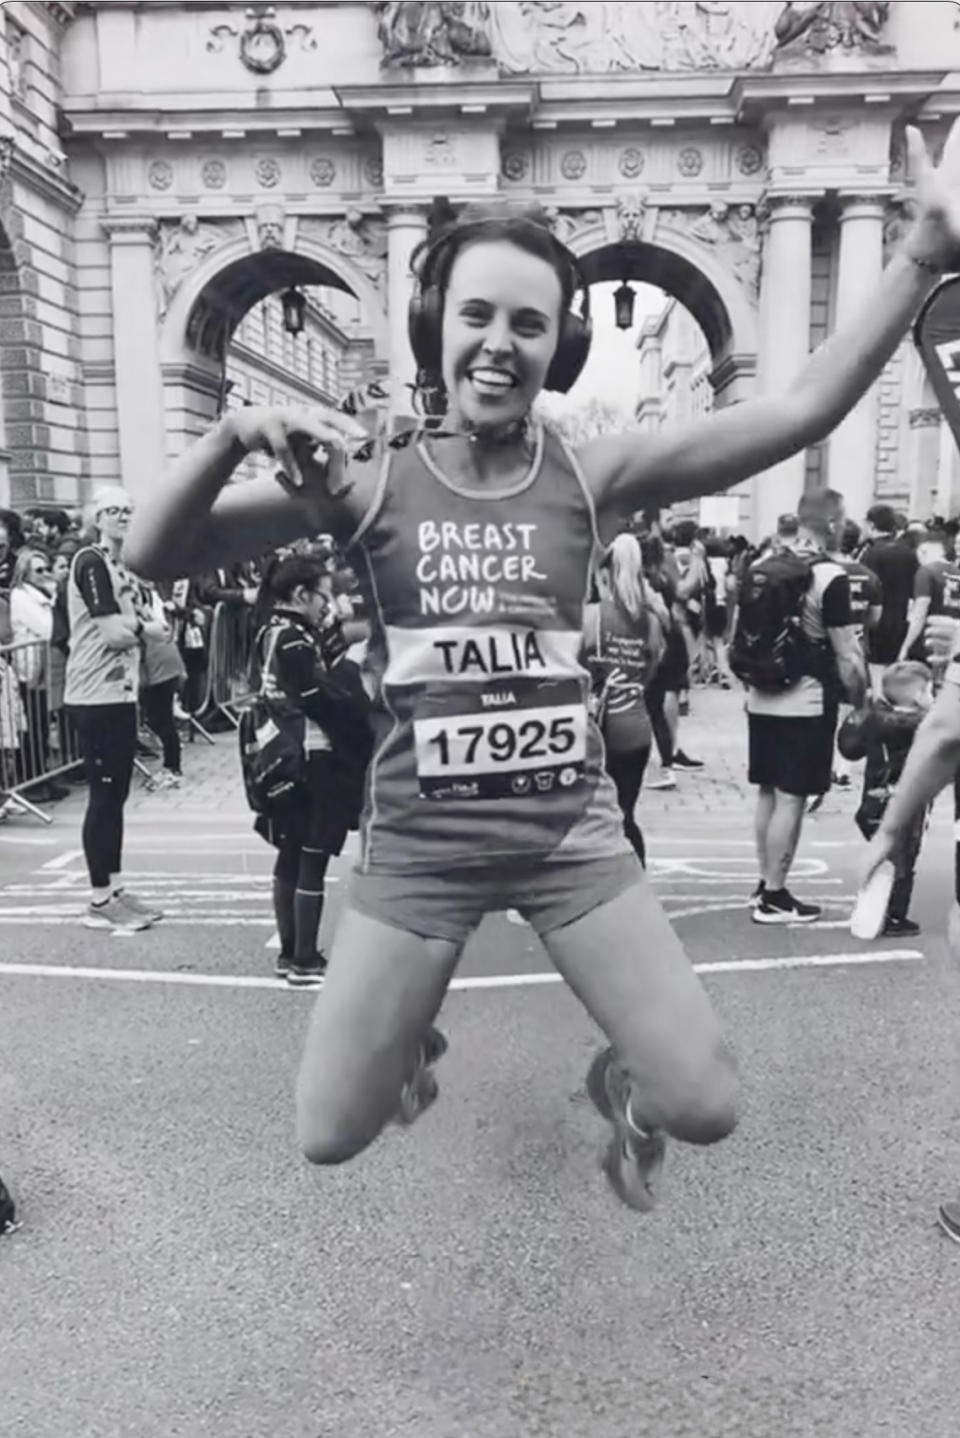 Lazarus ran a half marathon two years after an e-scooter crash left her unable to walk. (Talia Lazarus/SWNS)